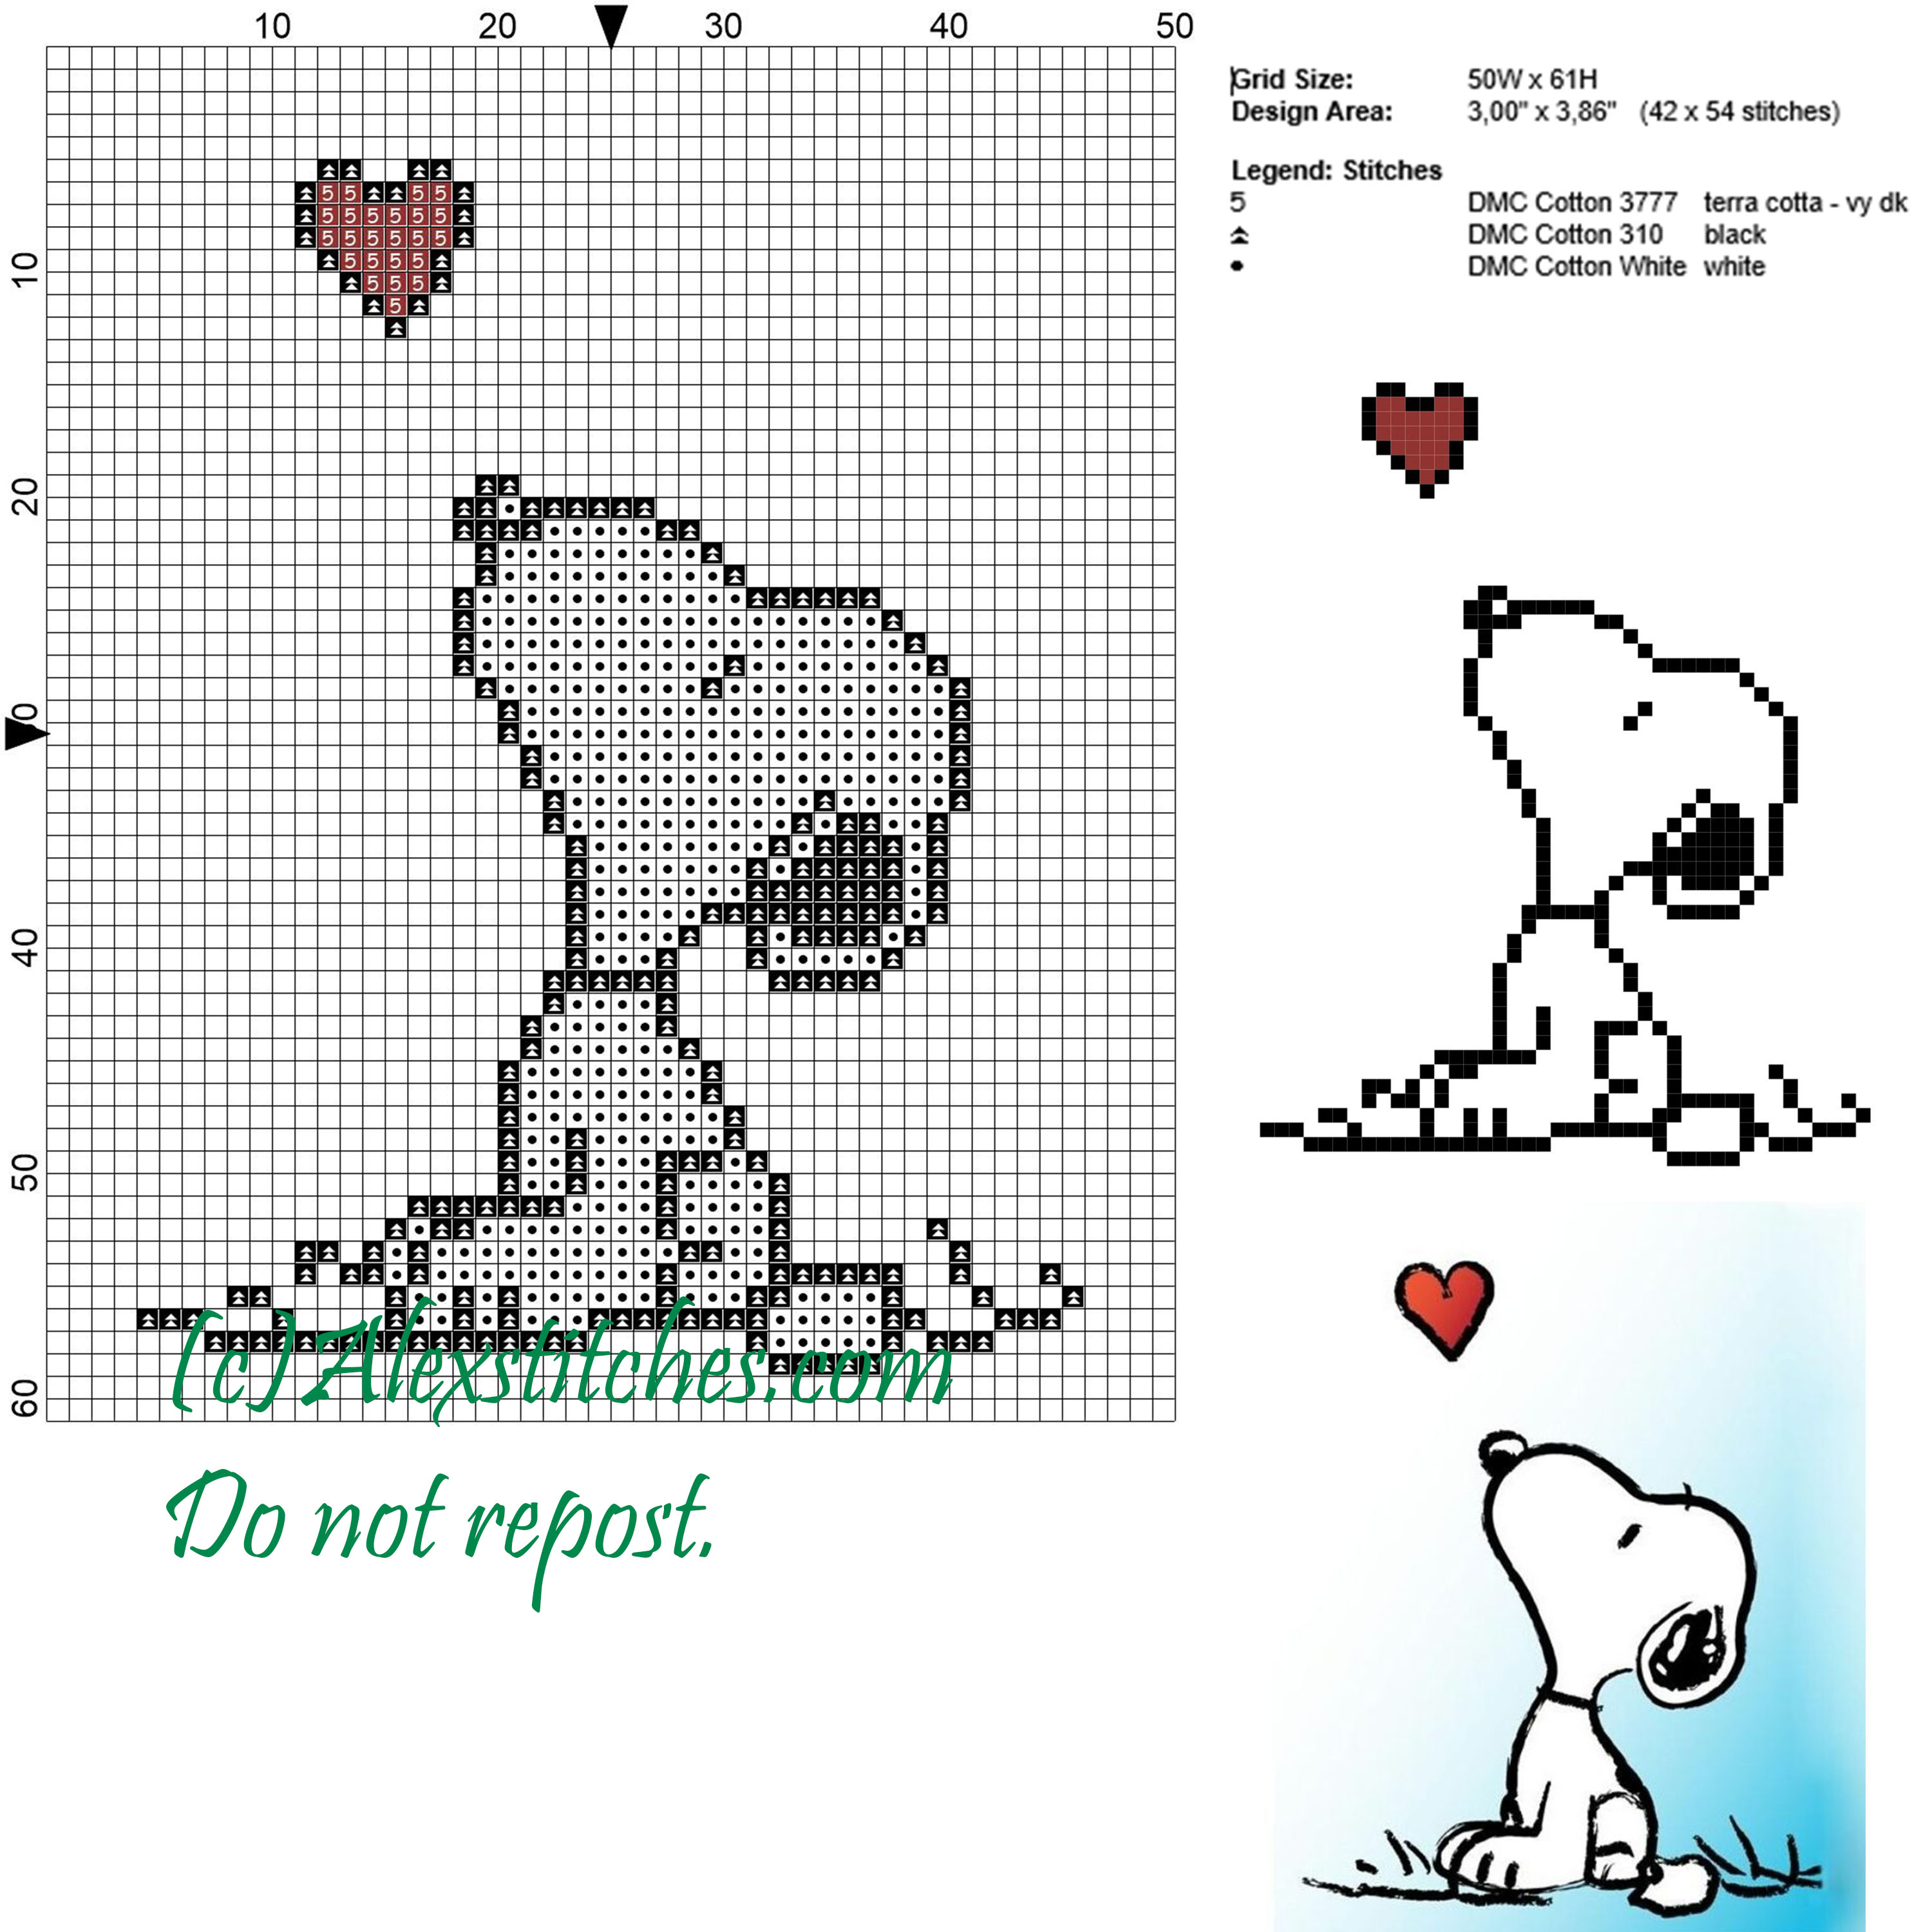 Snoopy and the heart cross stitch pattern 50x62 3 colors